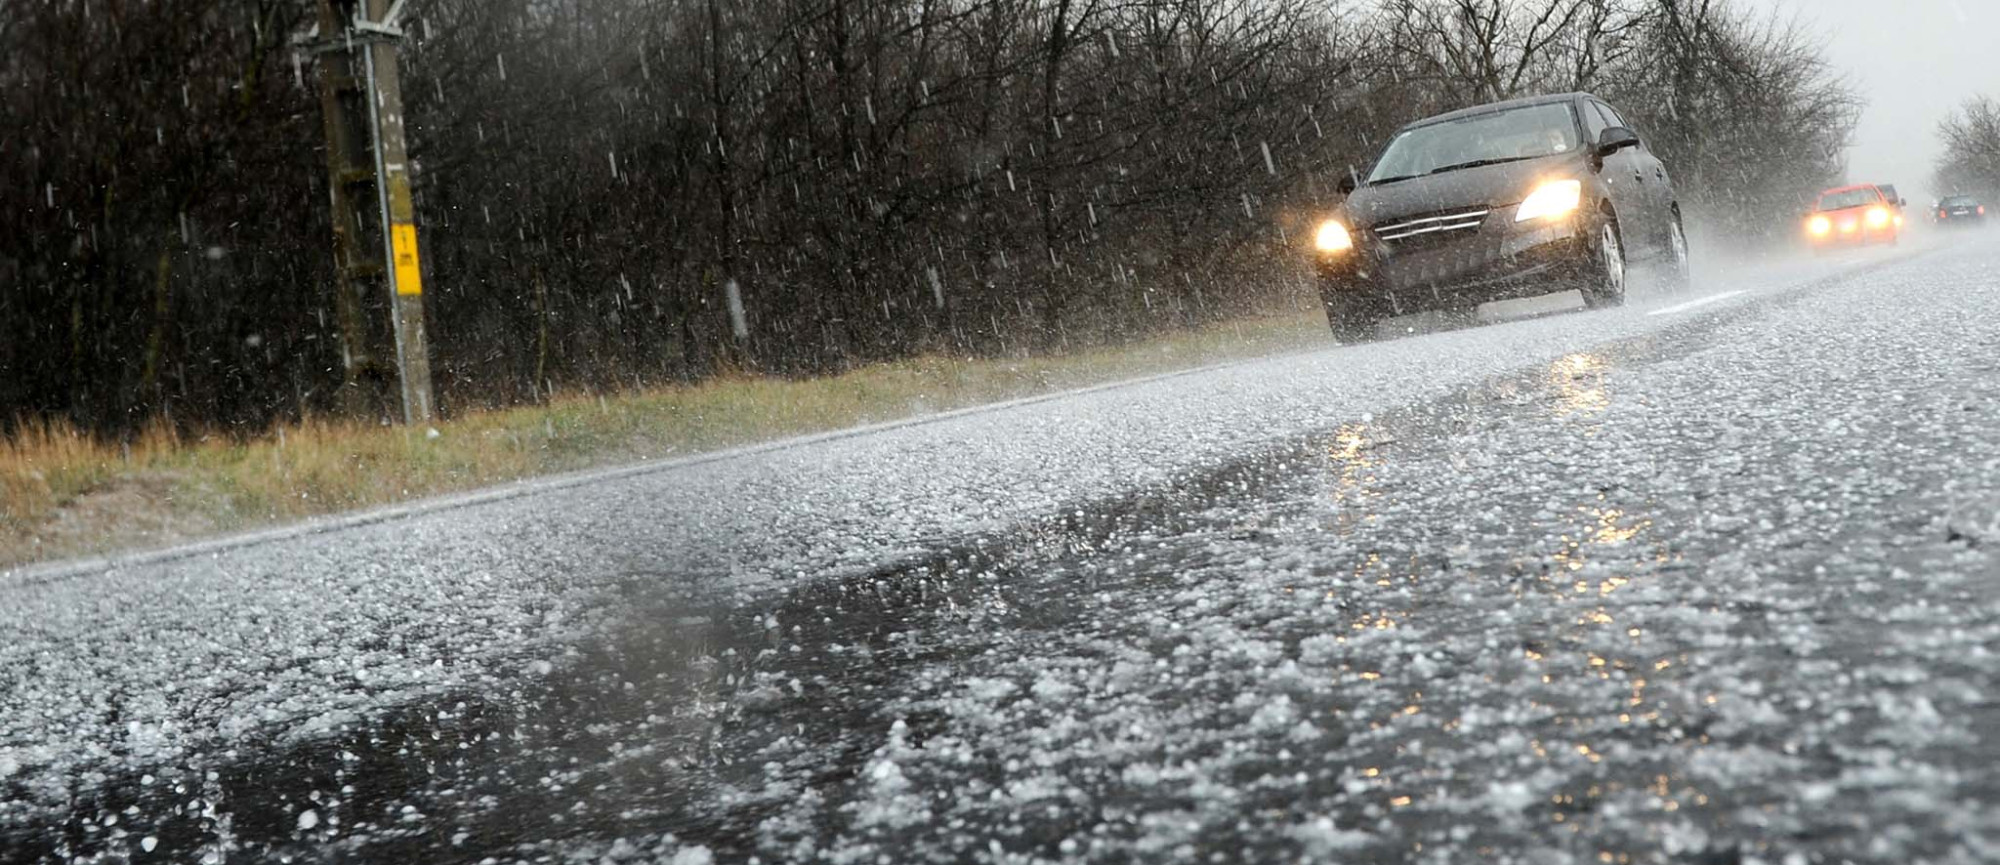 Hail Falling on Vehicles and Road